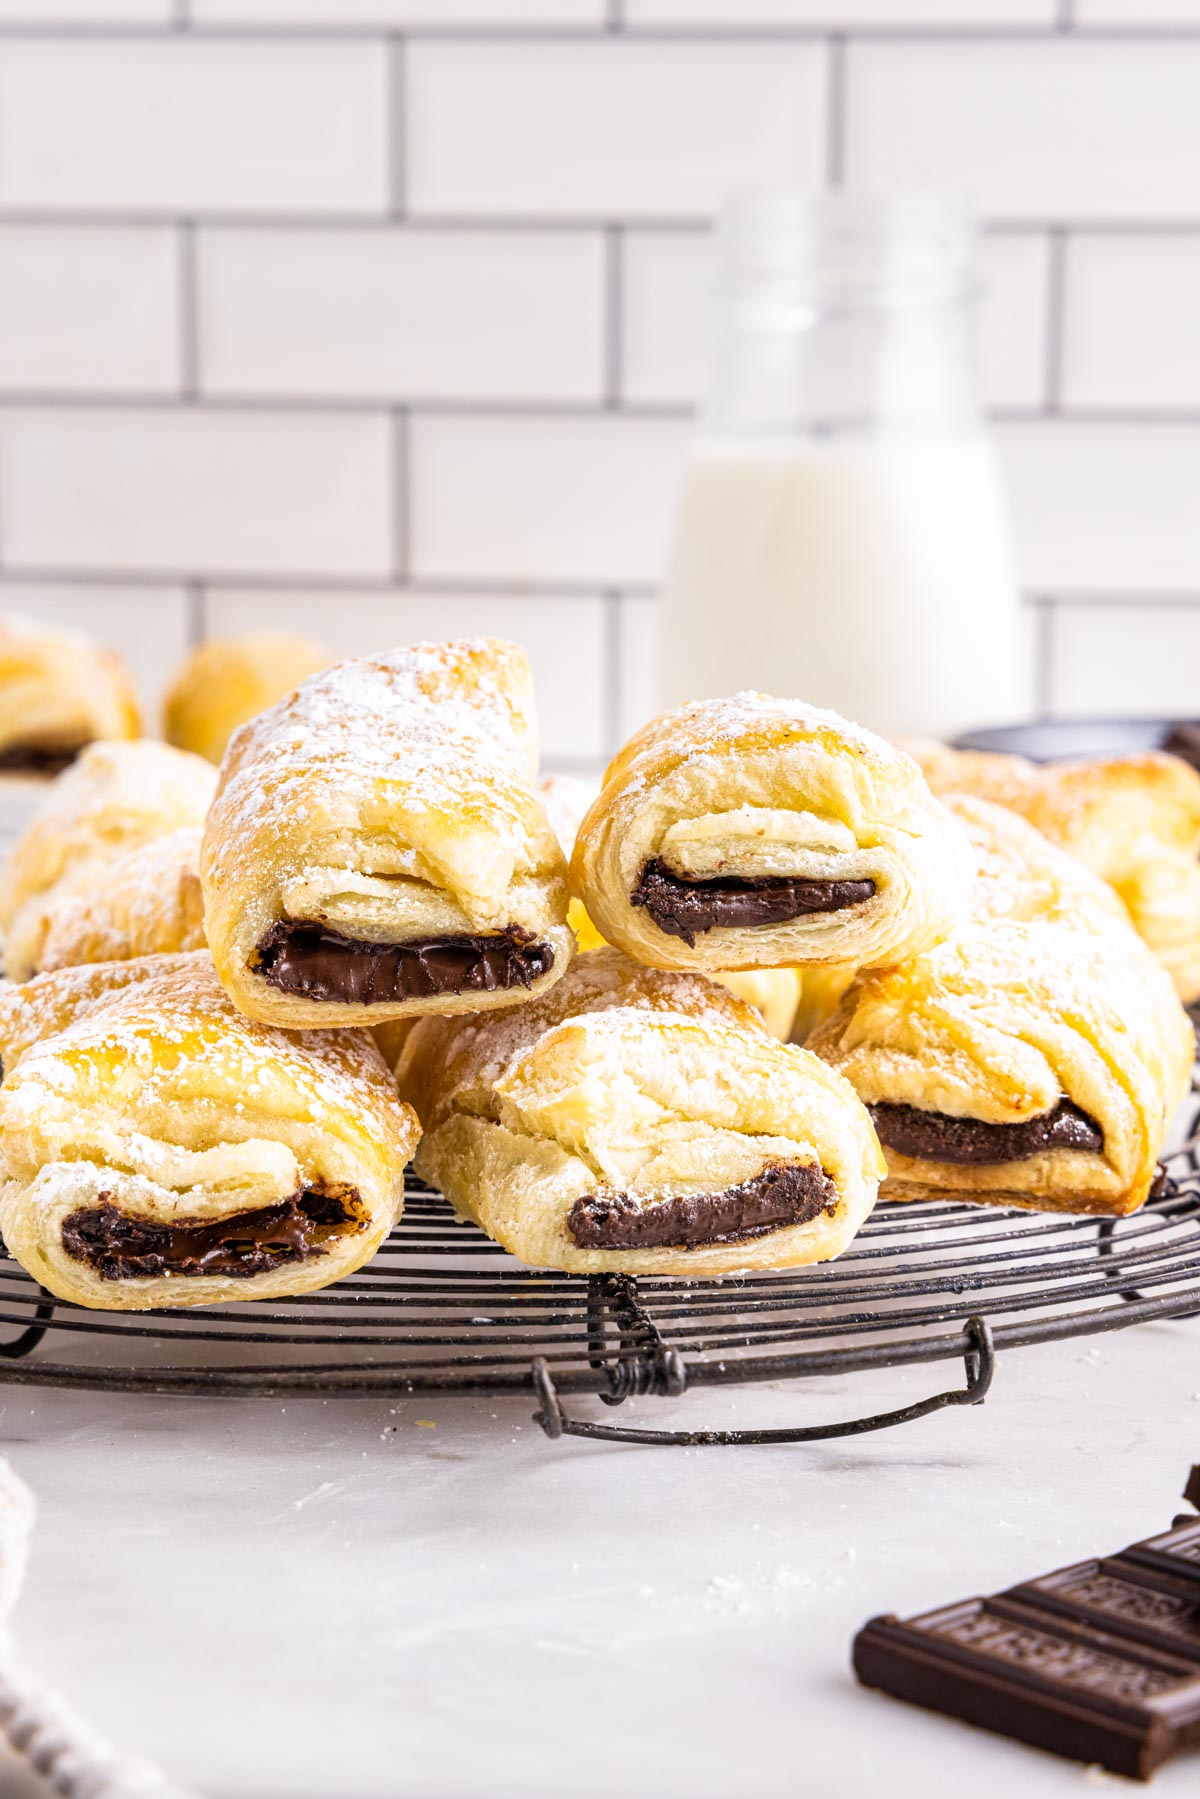 The finished Puff Pastry Chocolate Croissants on a wire rack.